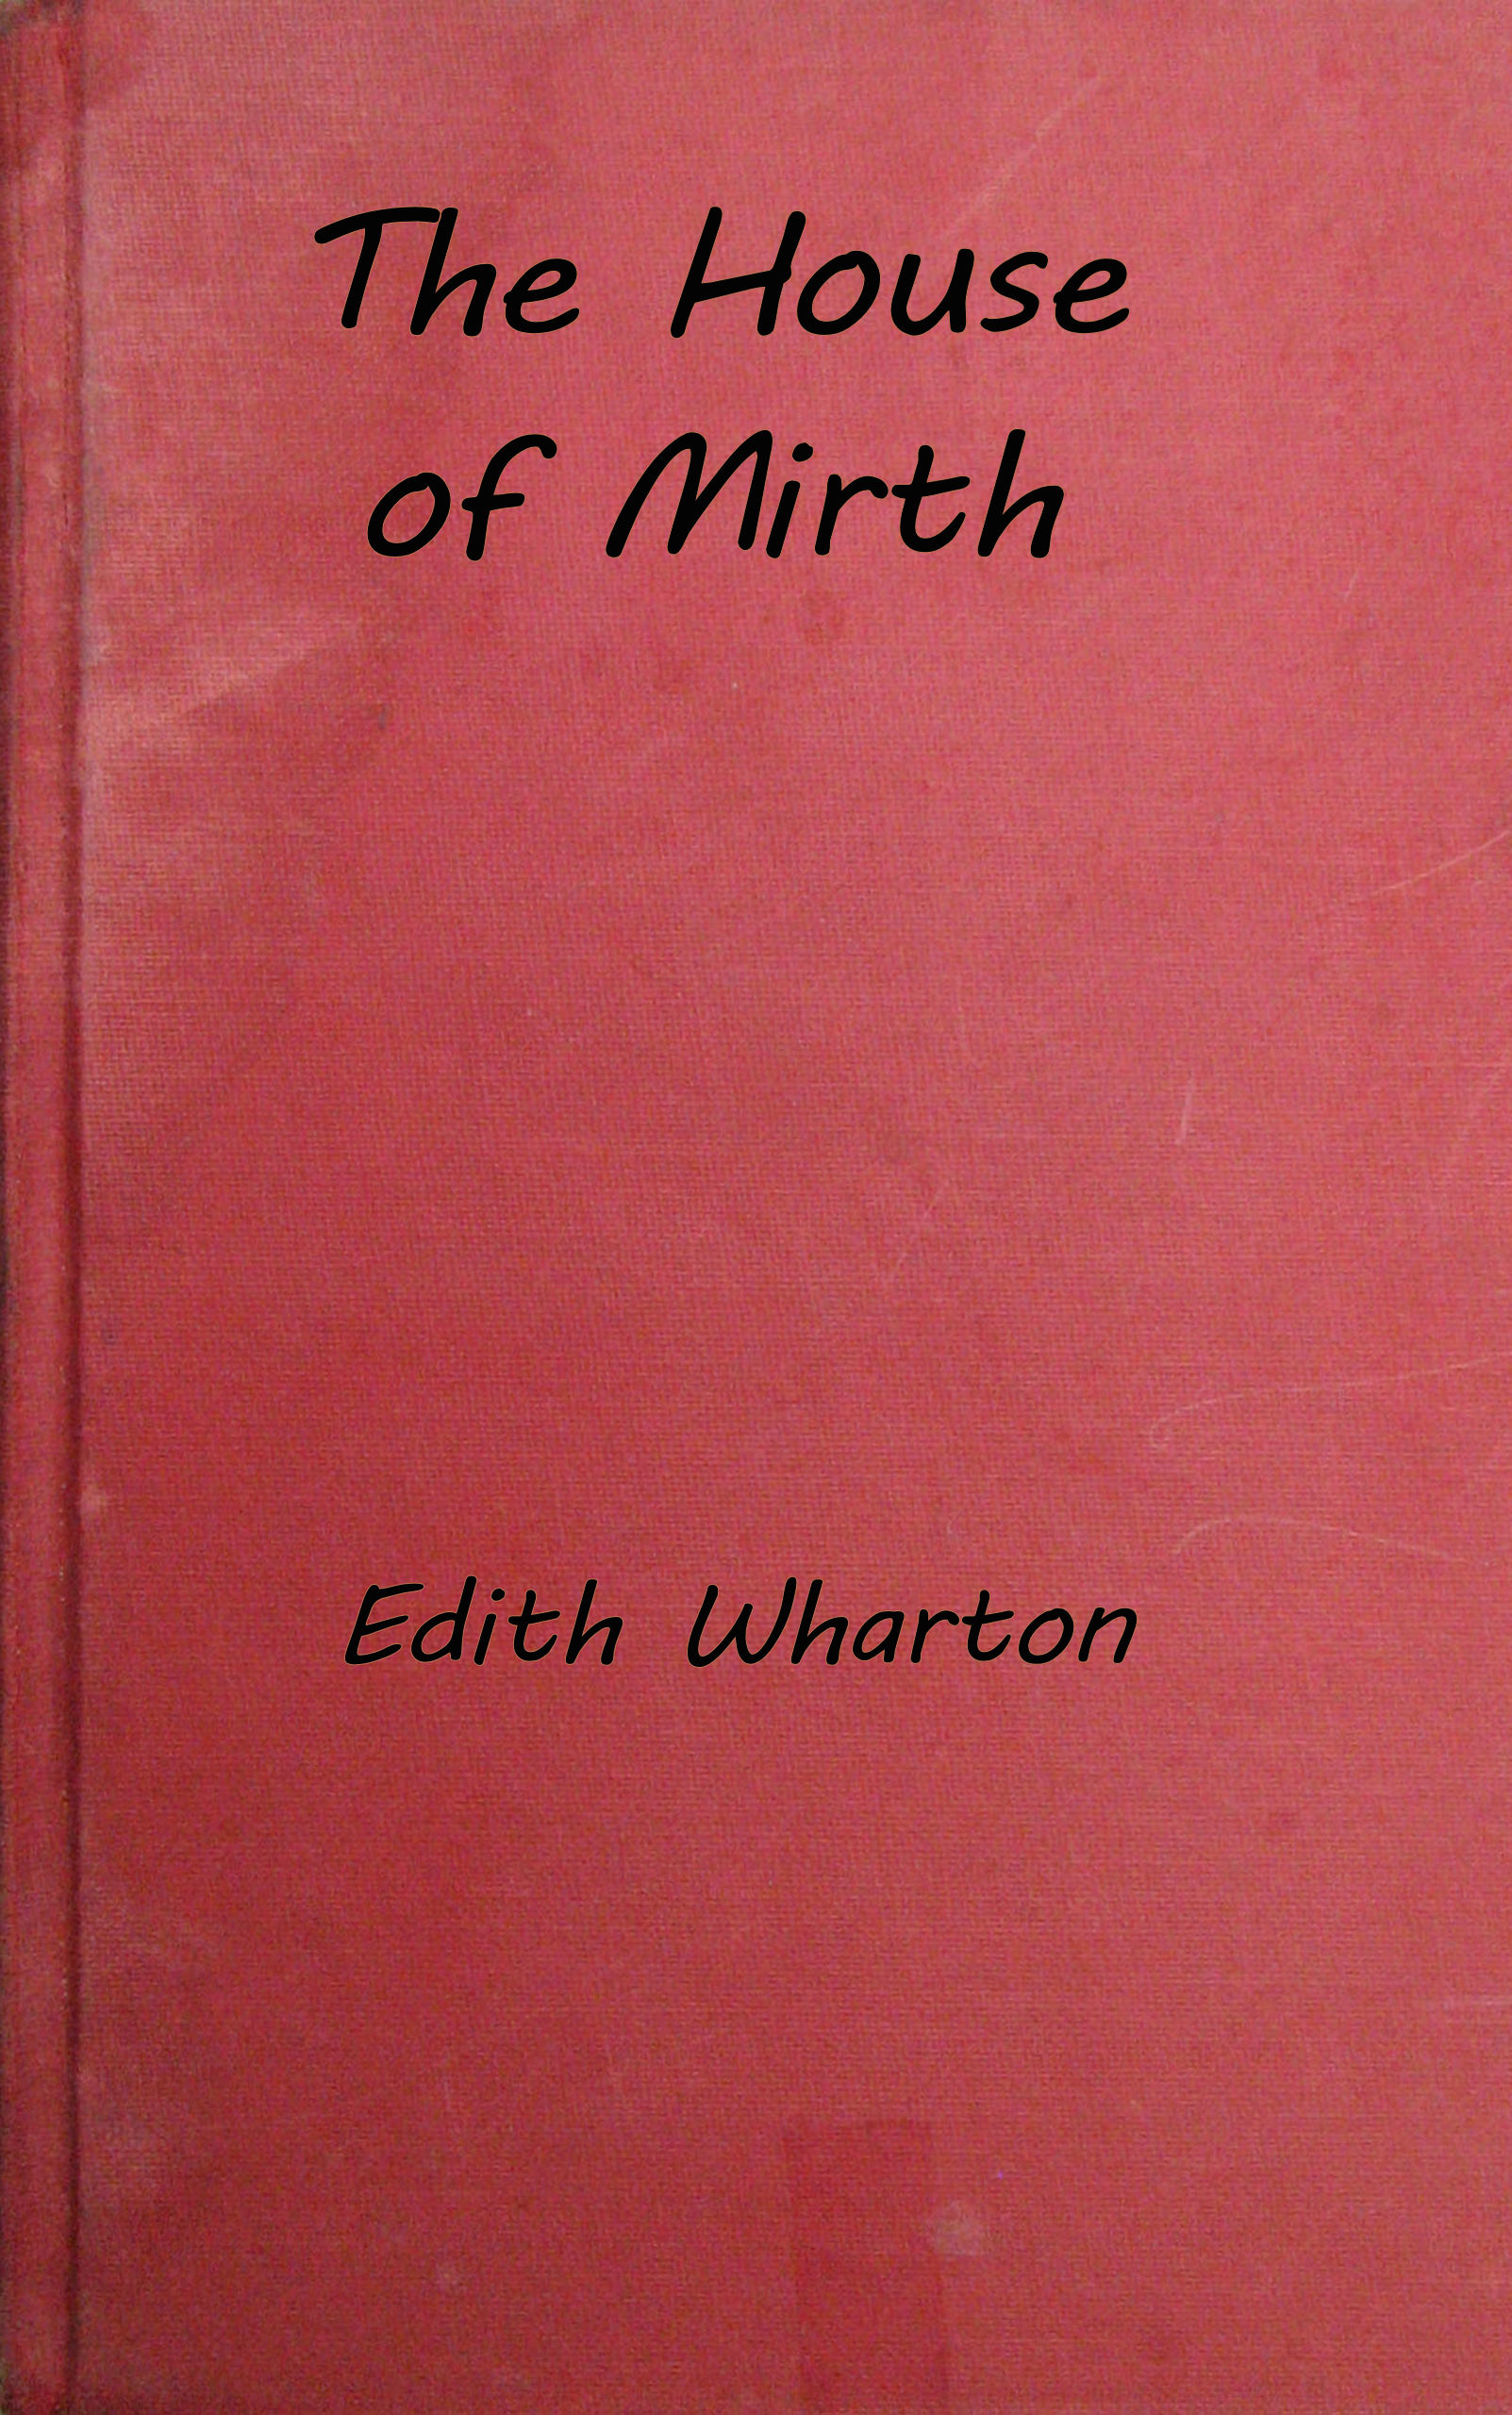 The house of Mirth, by Edith Wharton—A Project Gutenberg eBook